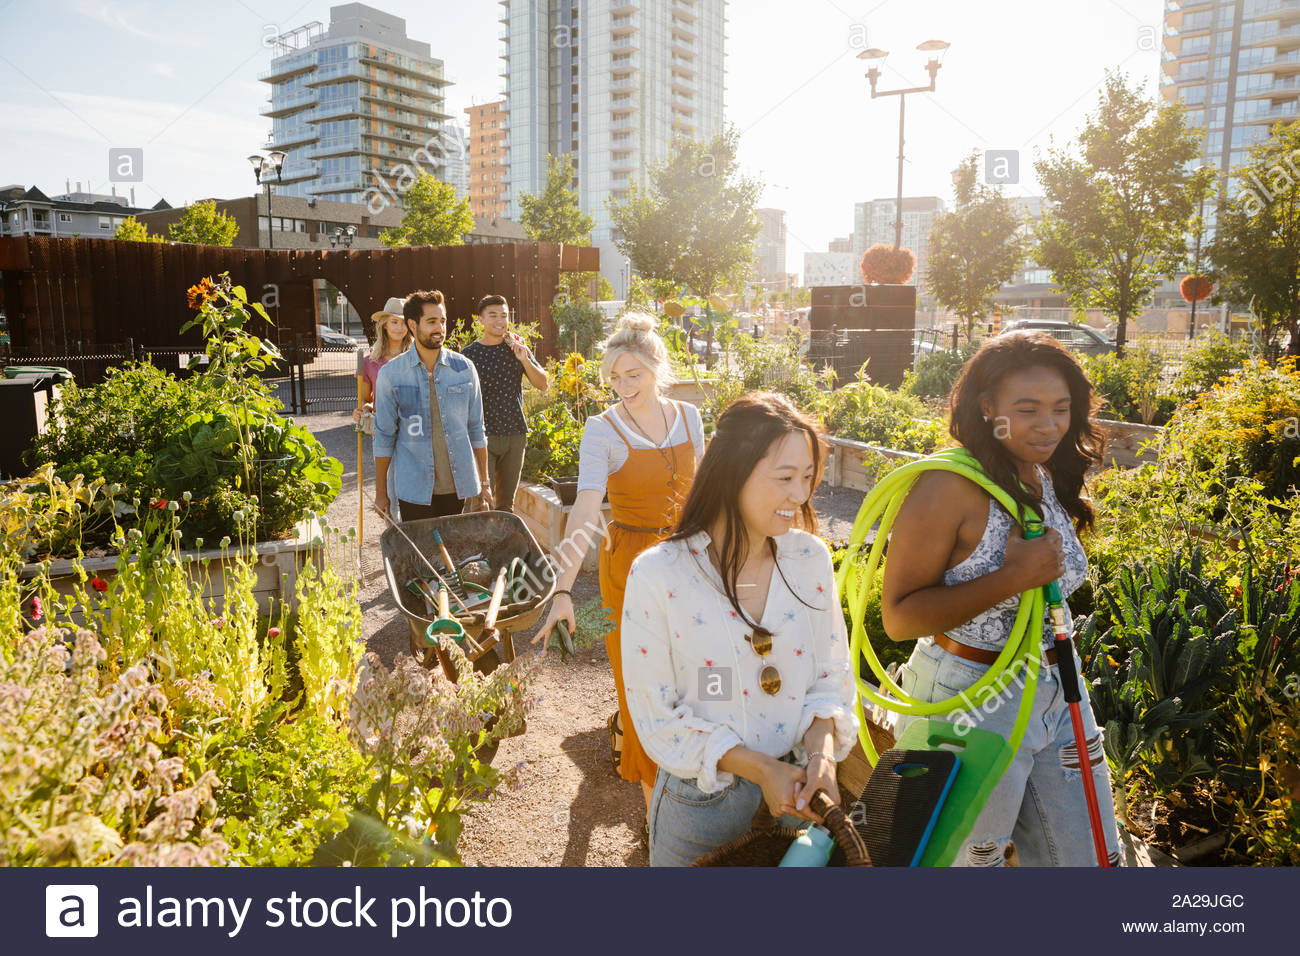 Young adult friends walking with equipment in sunny, urban community garden Stock Photo